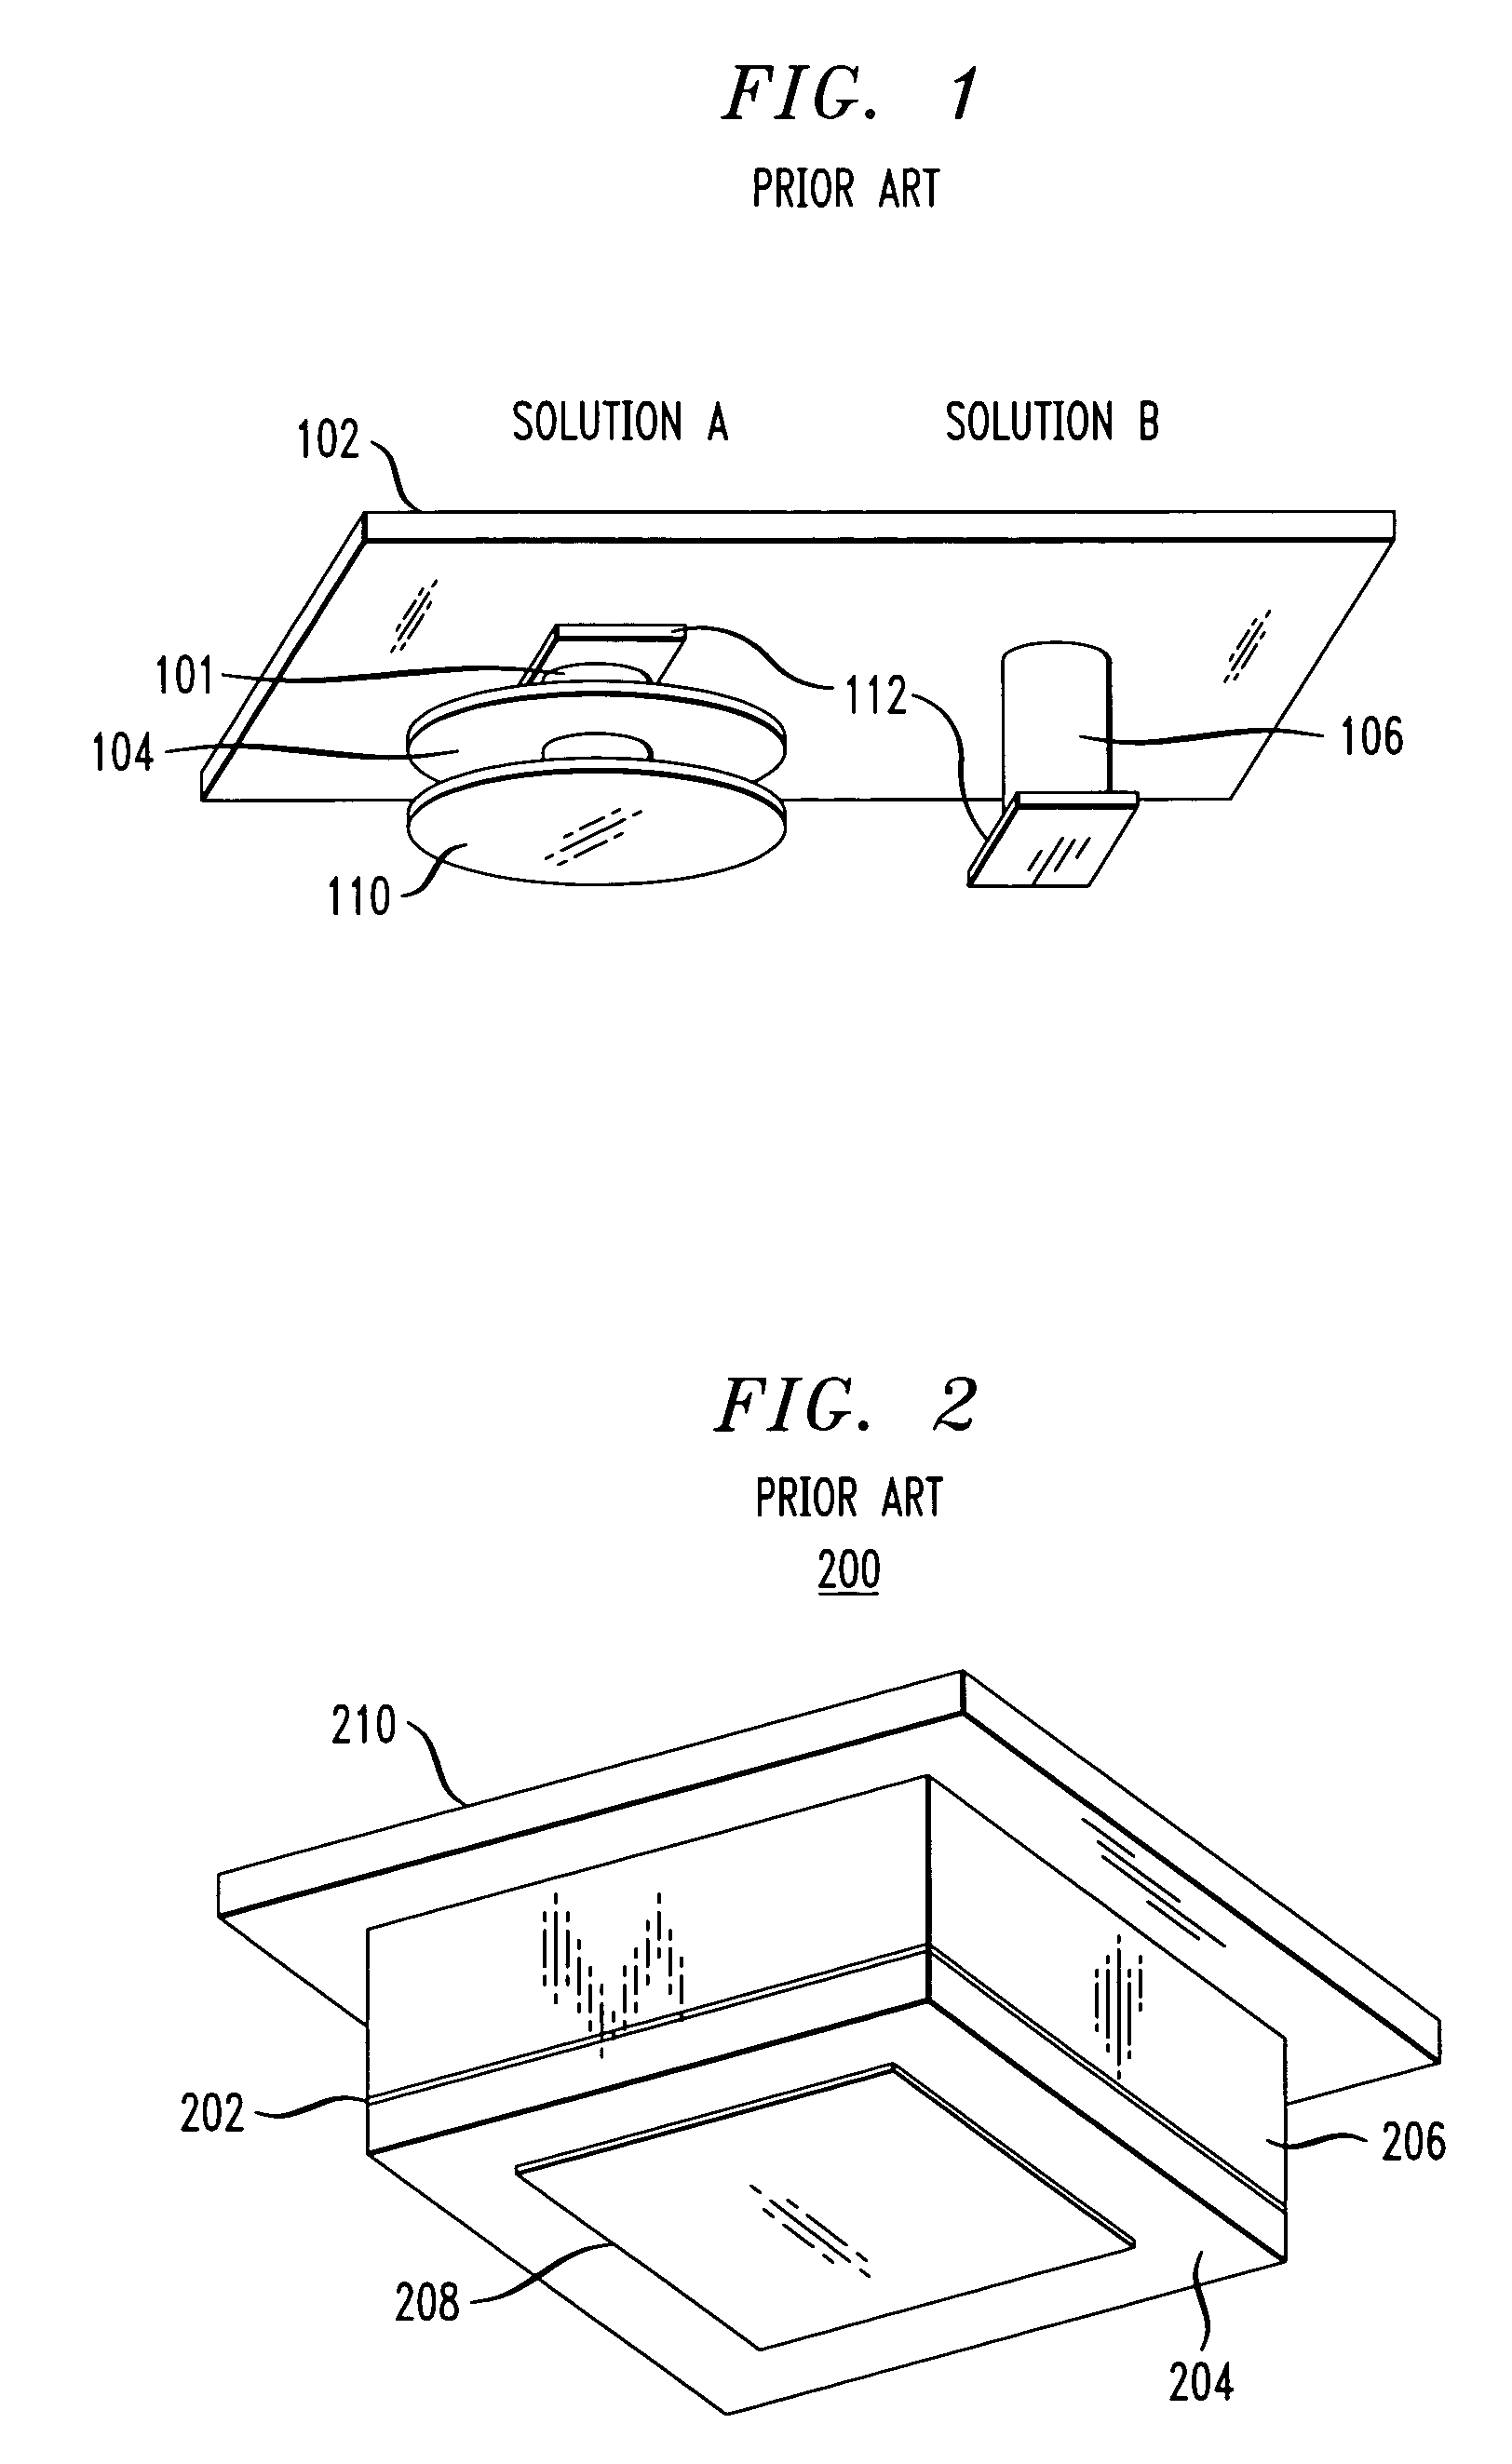 Heat-transfer devices